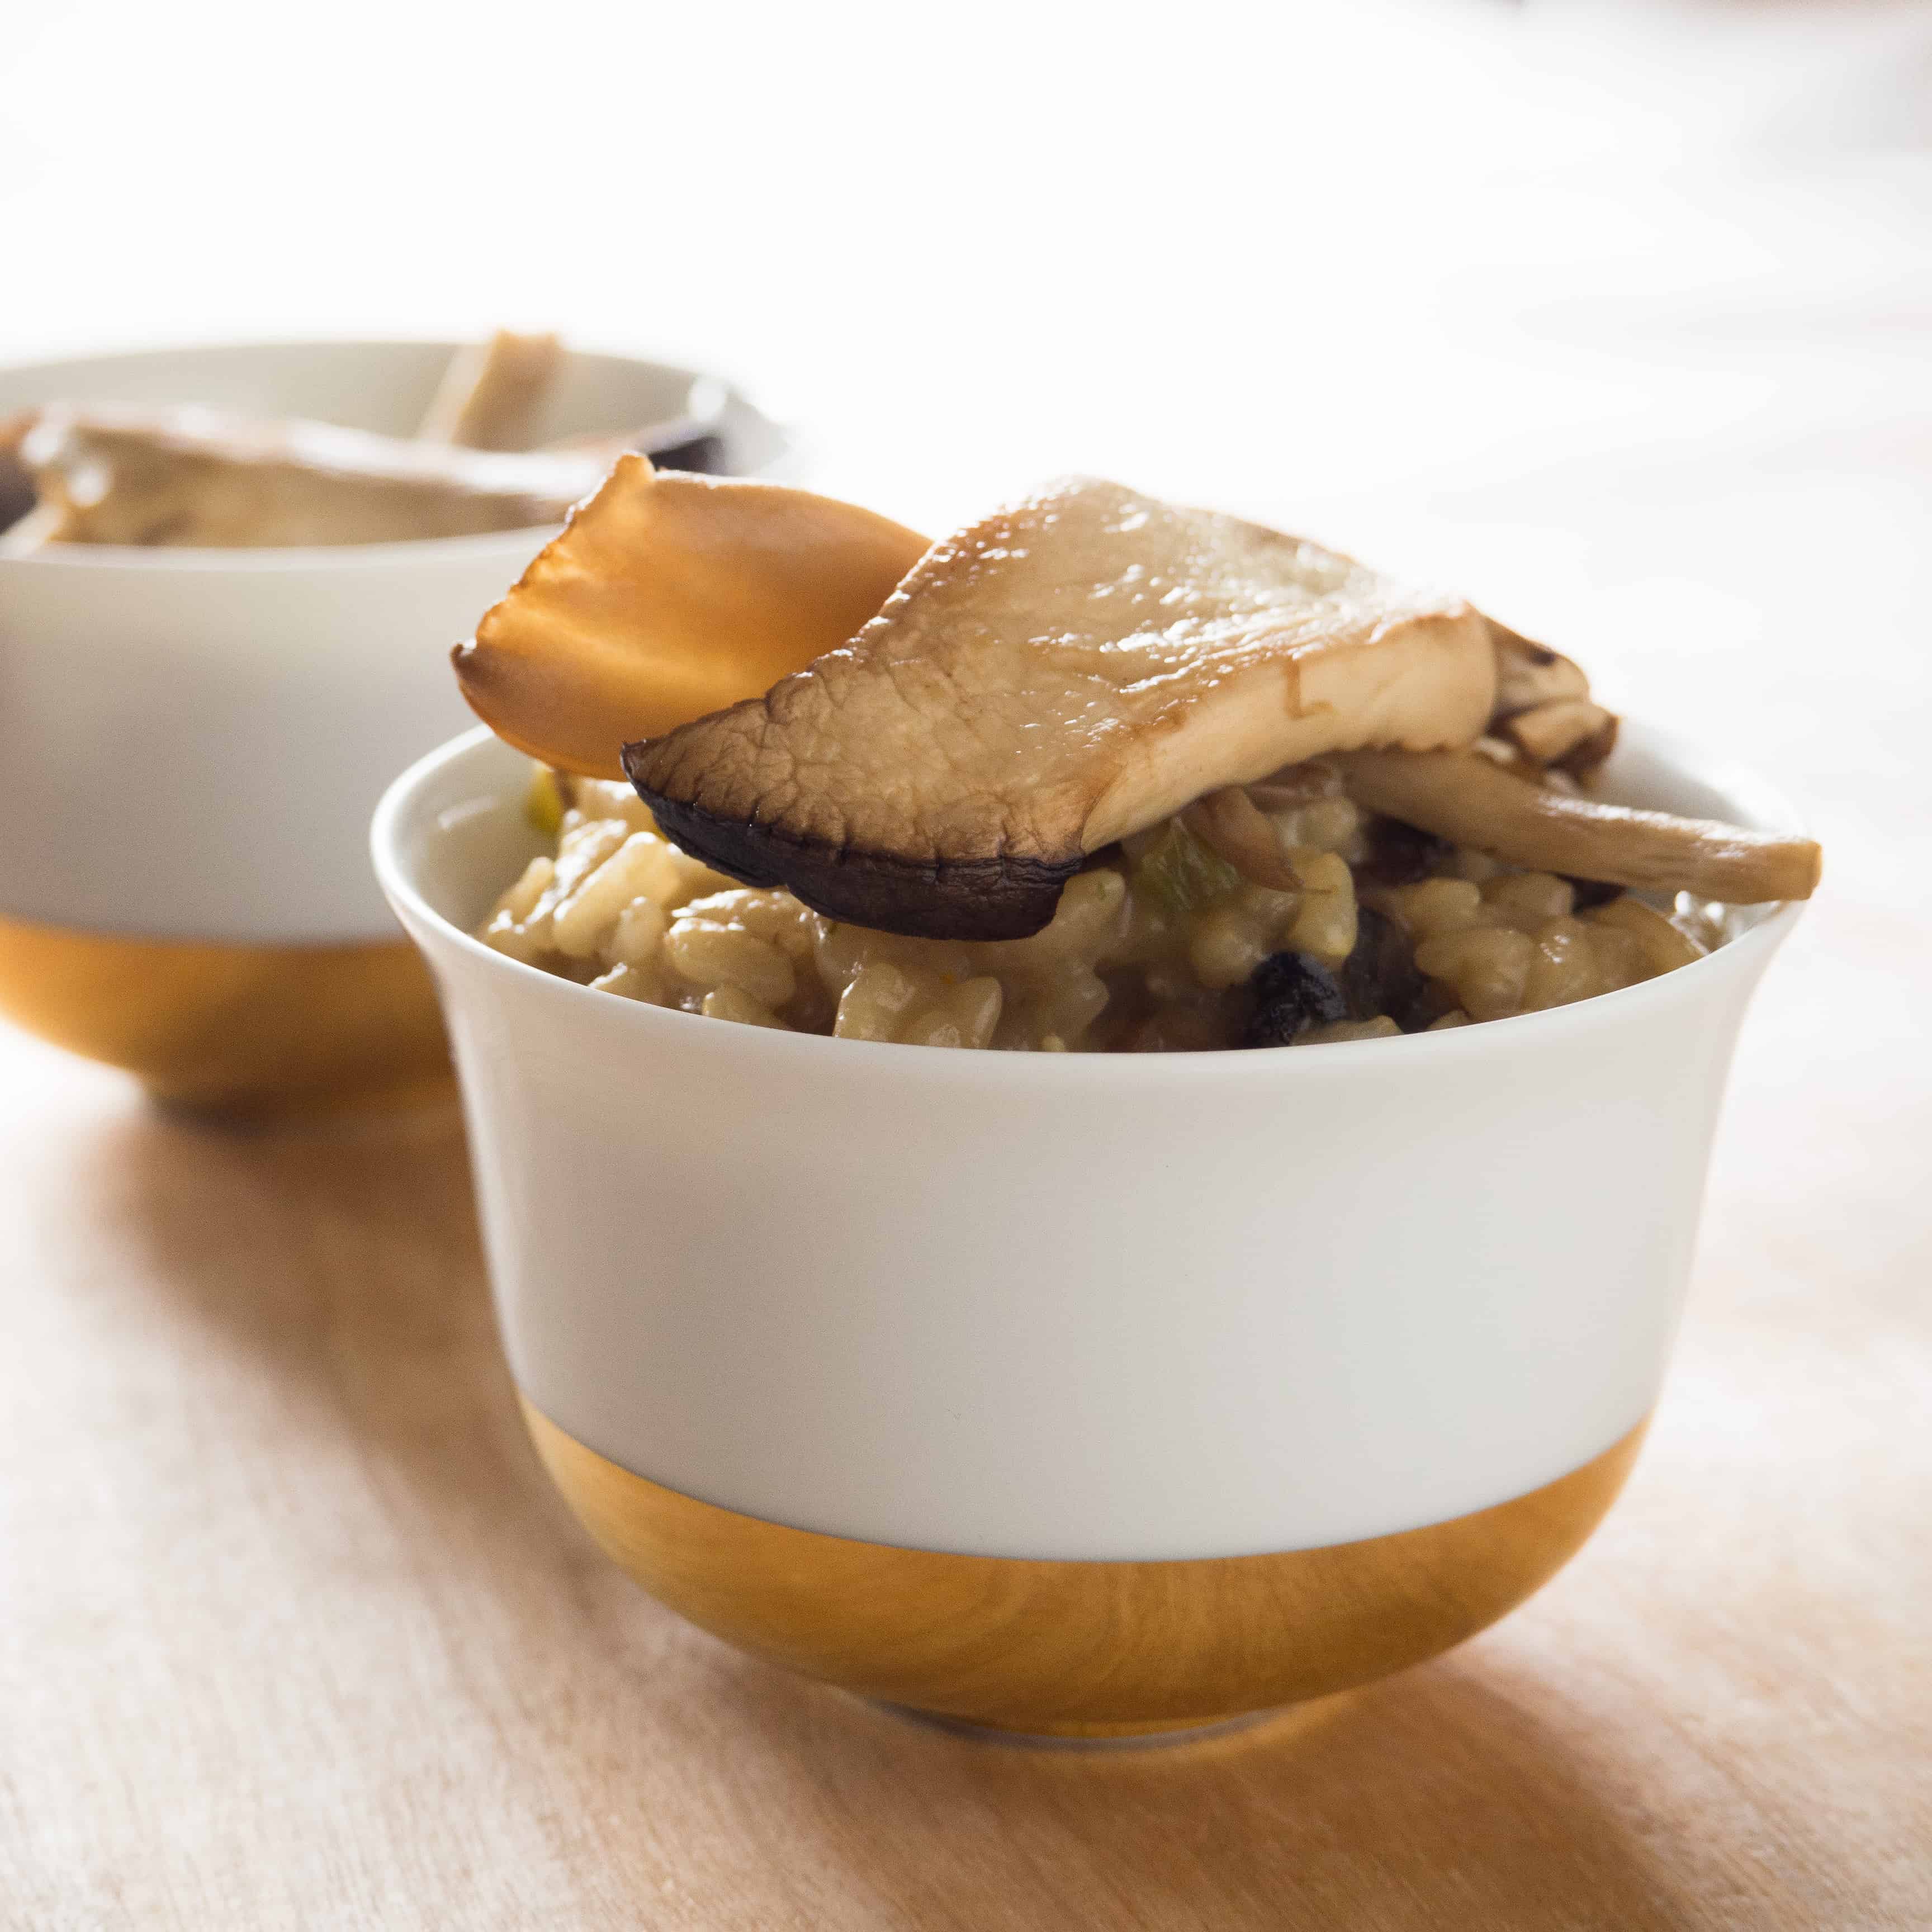 Mushroom Risotto with Grilled Mushrooms and Tarragon. Gluten-free, vegan.